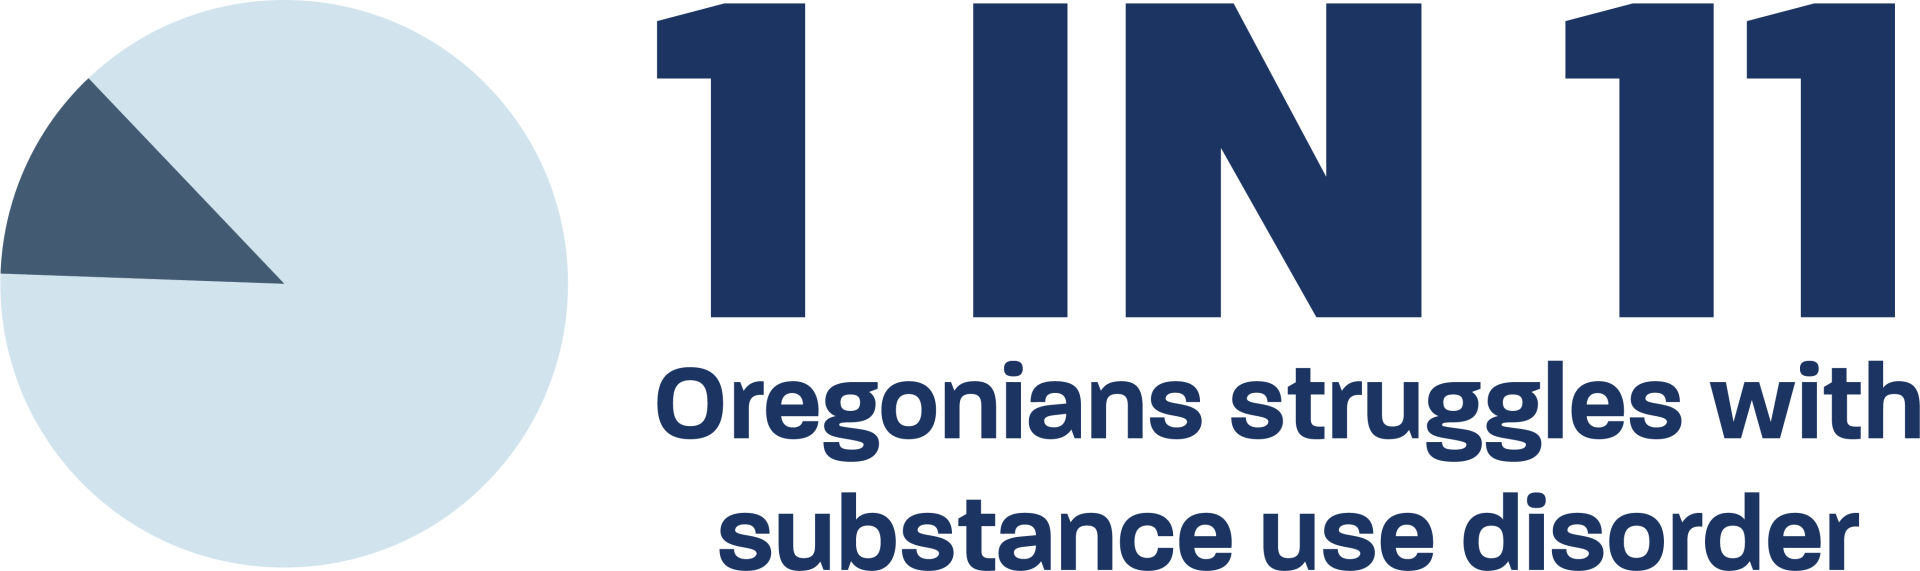 1 in 11 Oregonians struggles with substance use disorder